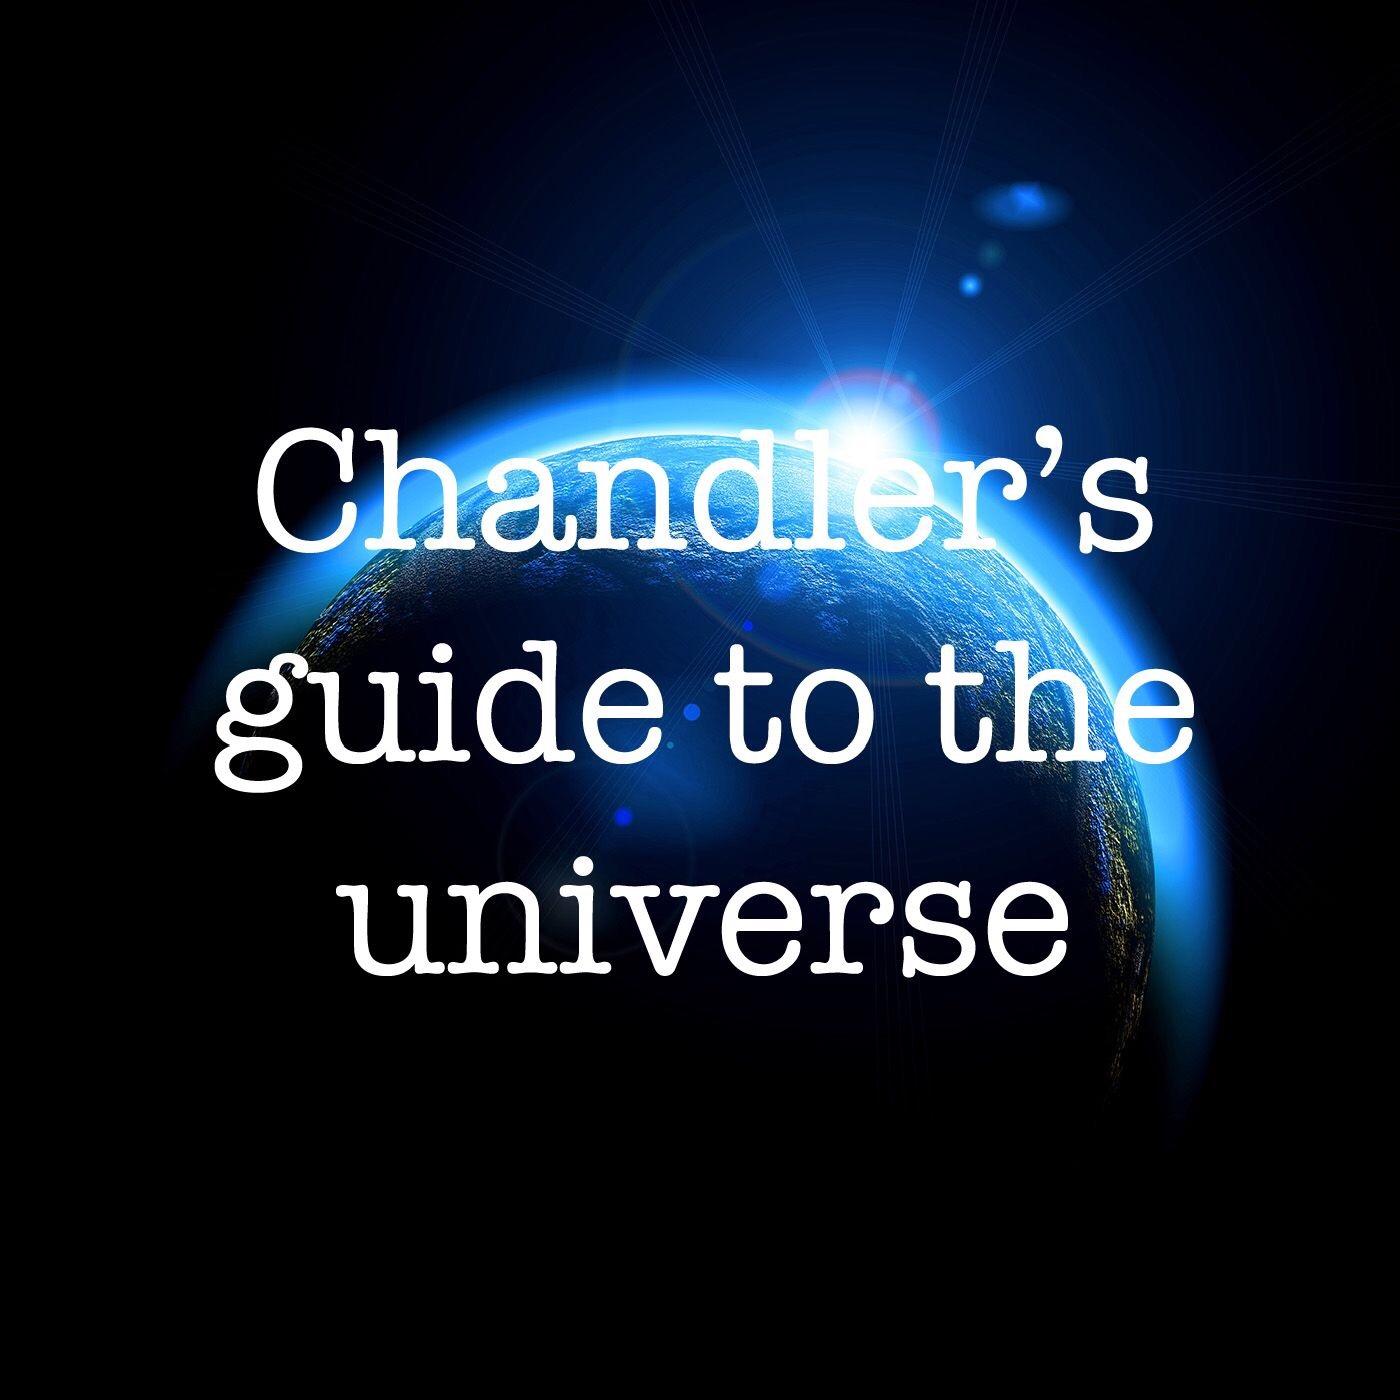 Chandler’s guide to the universe